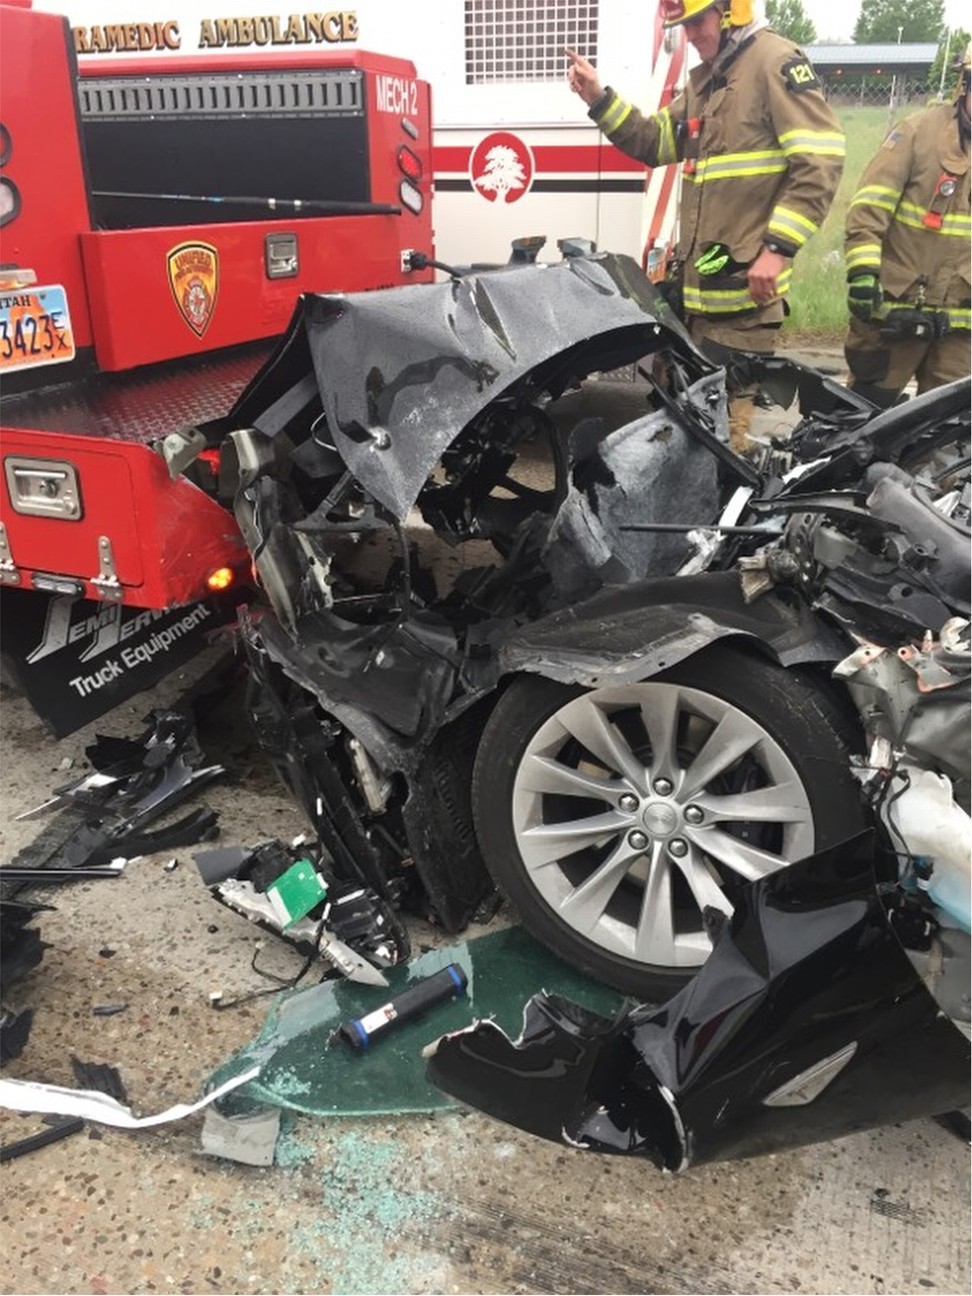 It’s not clear whether the Autopilot function was engaged before the crash. Photo: South Jordan Police Department via AP